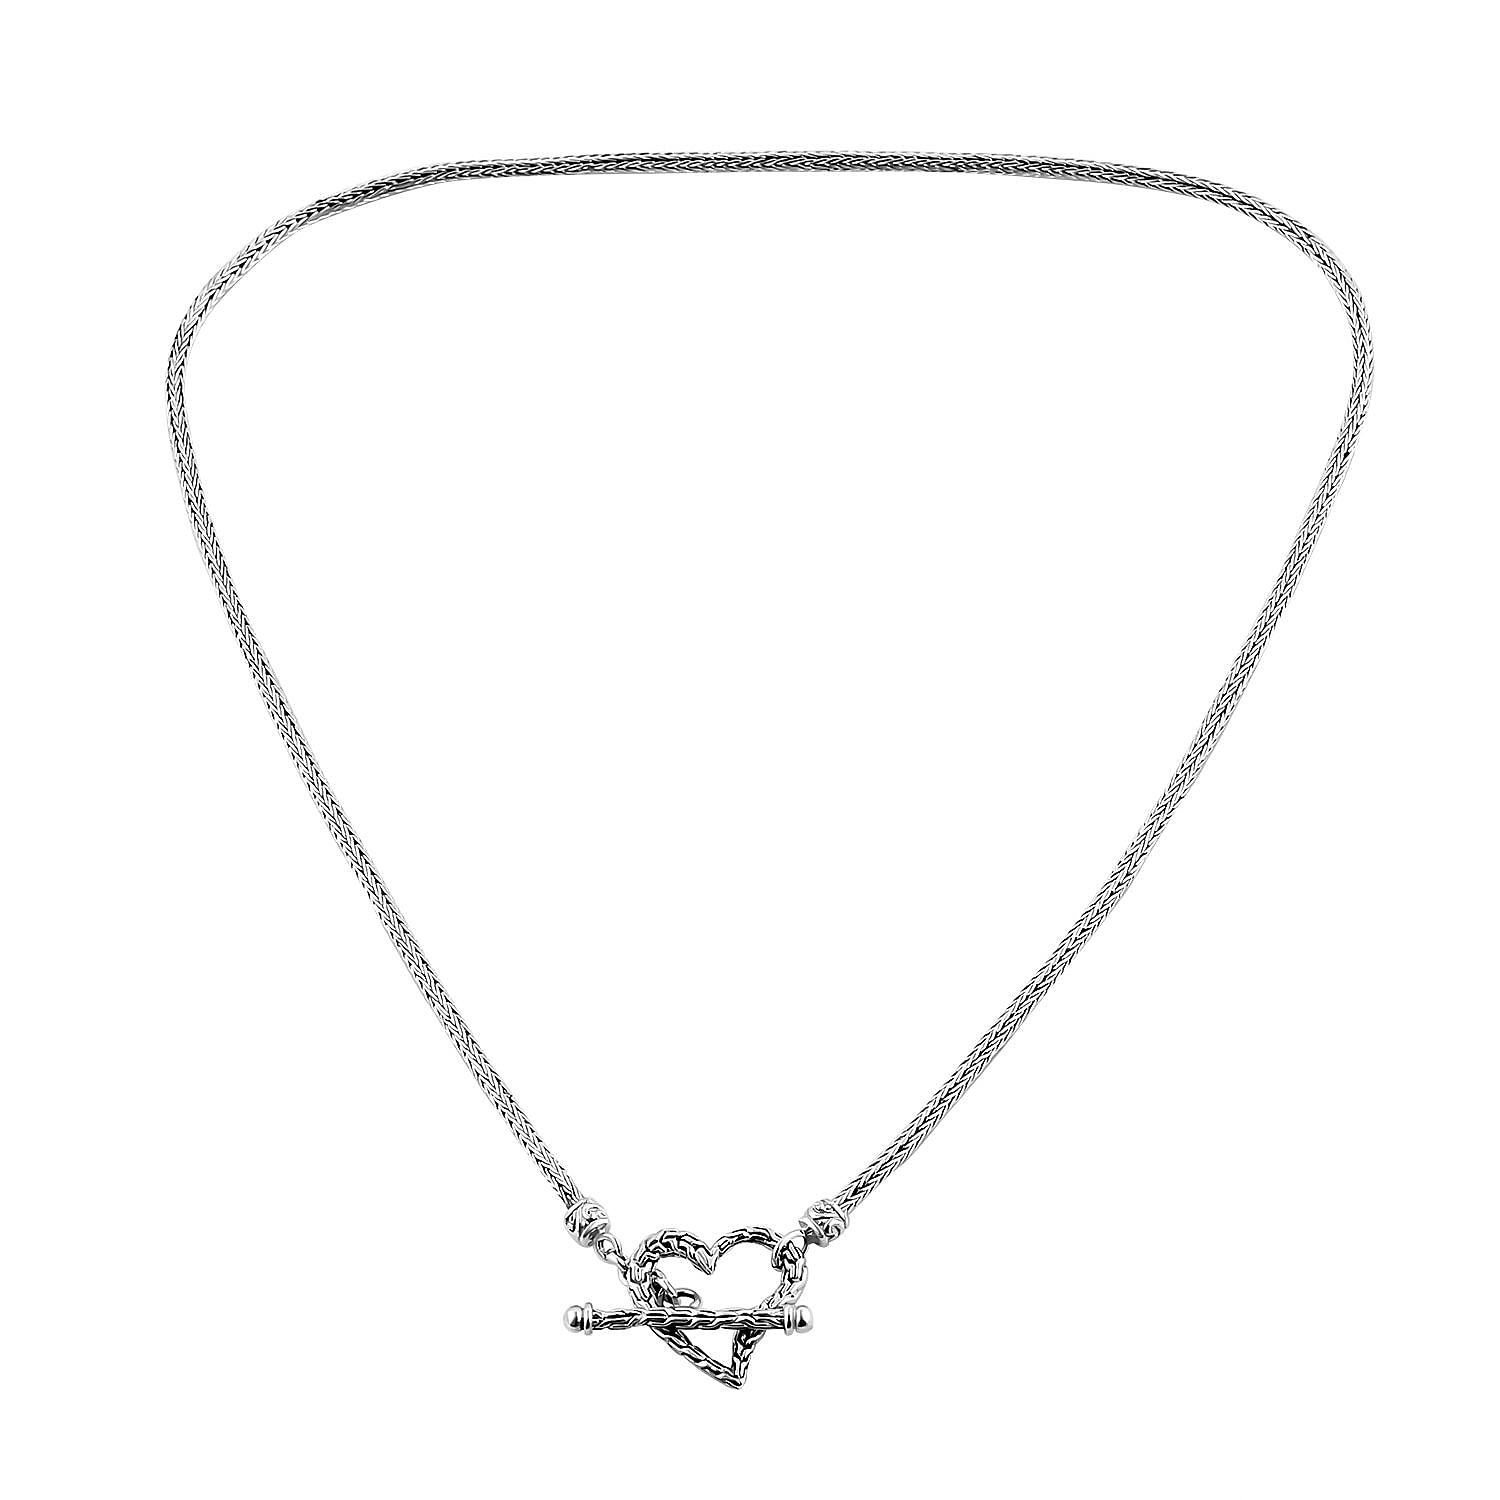 Royal Bali Collection - Designer Inspired Artisan Crafted Heart Toggle Necklace in Sterling Silver (Size - 20), 19.36 Gms